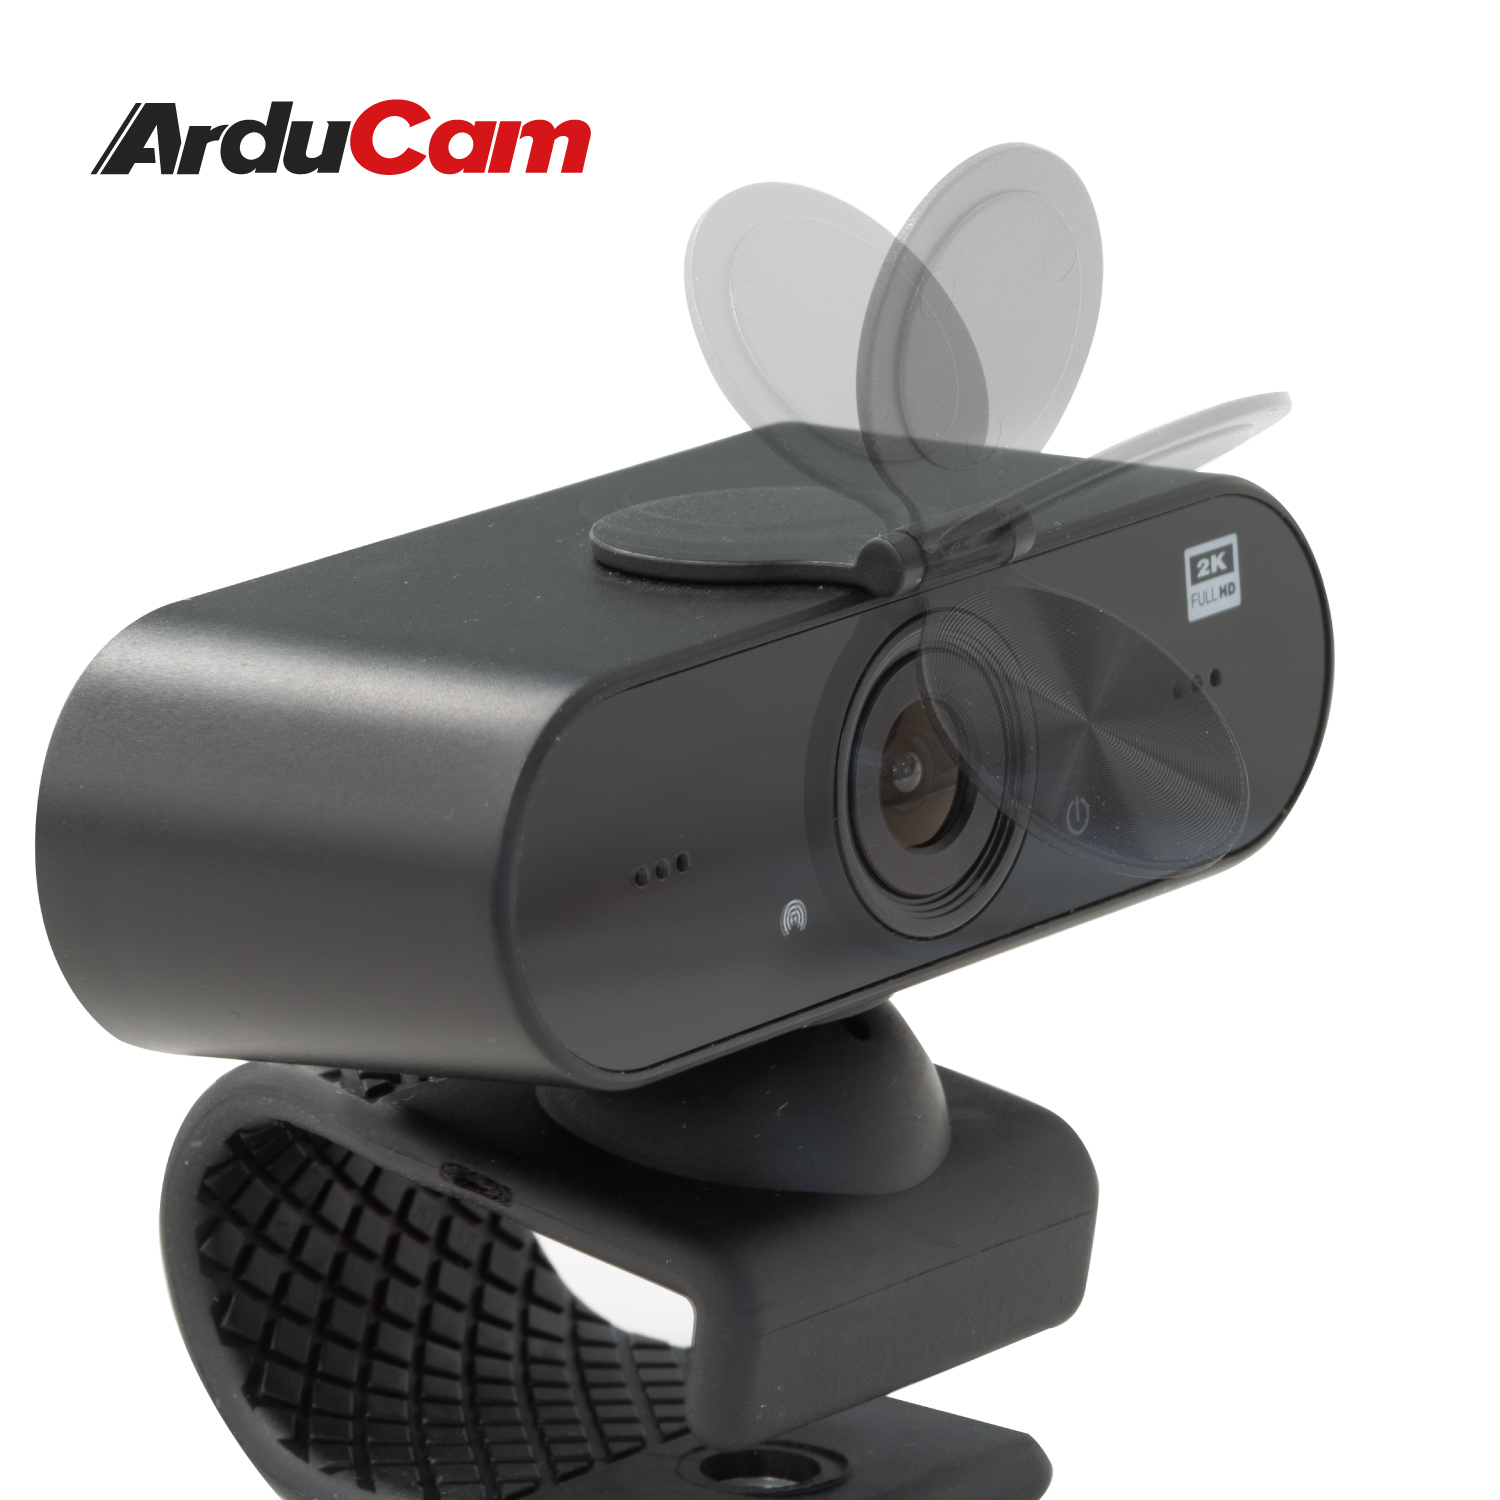 Discontinued] 1080P 60FPS HD USB Camera, H.265/H.264 High Definition 2MP  UVC Camera for Industrial Webcam, High-Speed USB 2.0 Camera Without  Microphone - Arducam